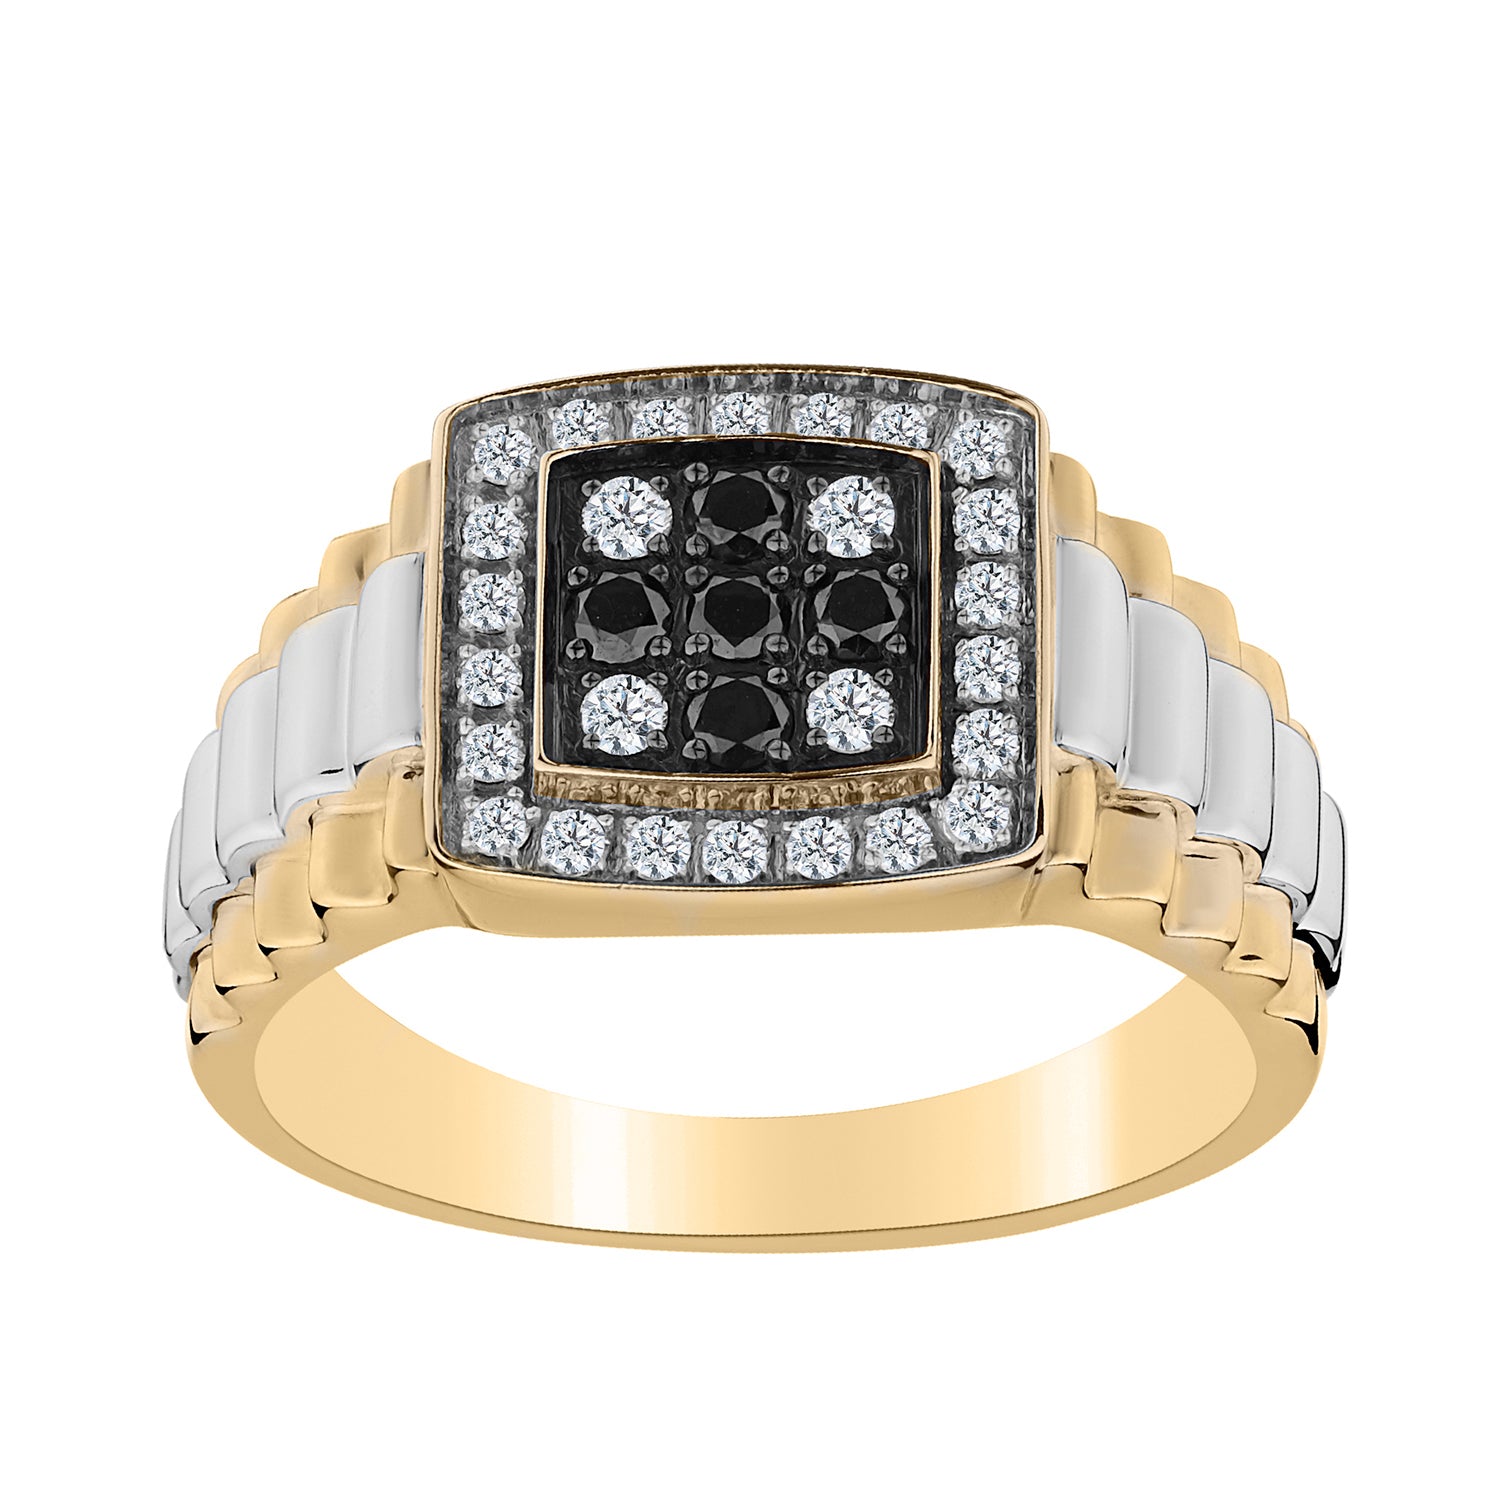 .50 CARAT BLACK AND WHITE DIAMOND GENTLEMAN'S RING, 10kt YELLOW GOLD....................NOW - Griffin Jewellery Designs